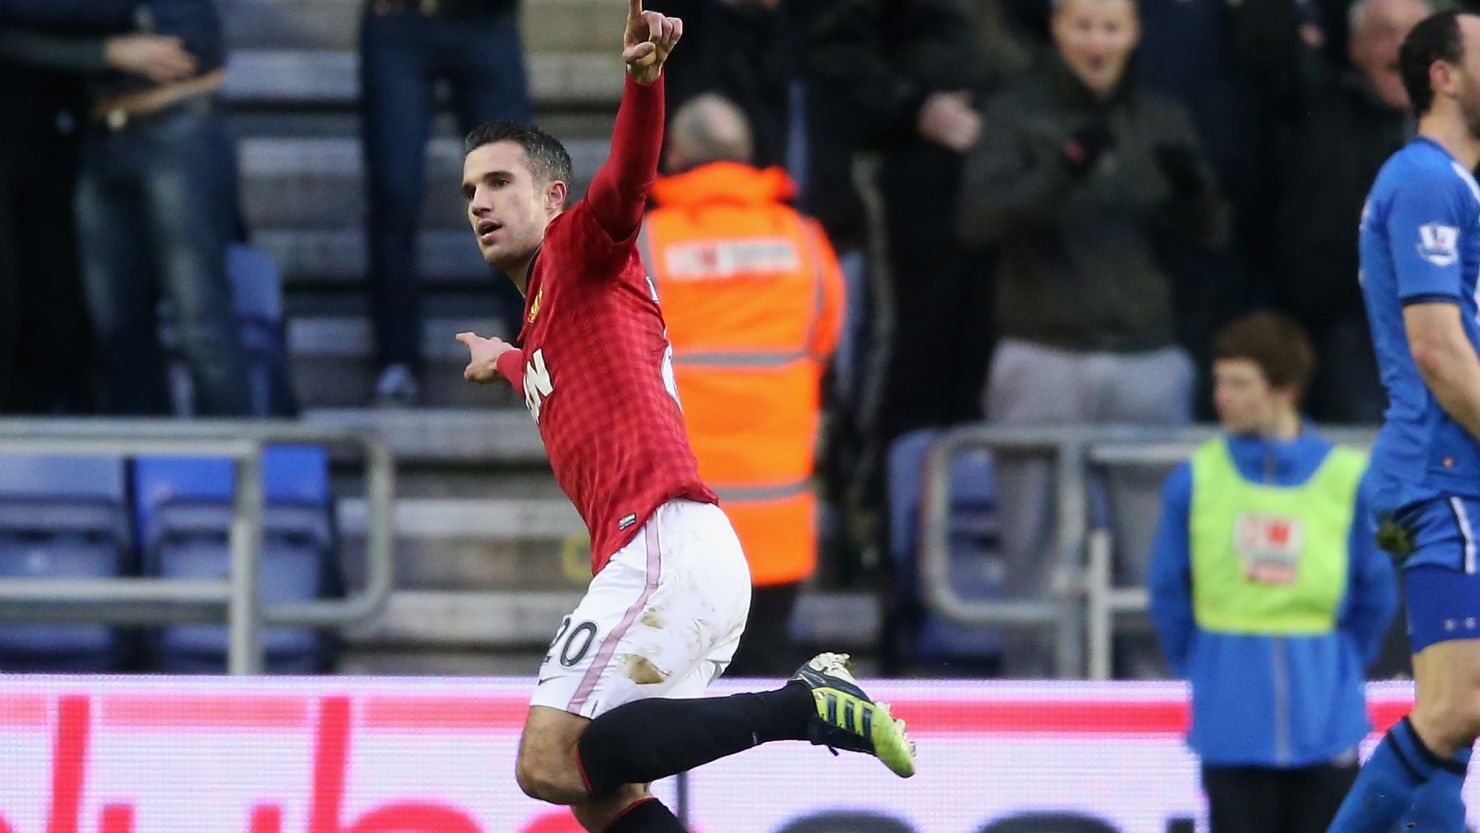 Robin van Persie wheels away after scoring Manchester United's second goal in the 4-0 win over Wigan.